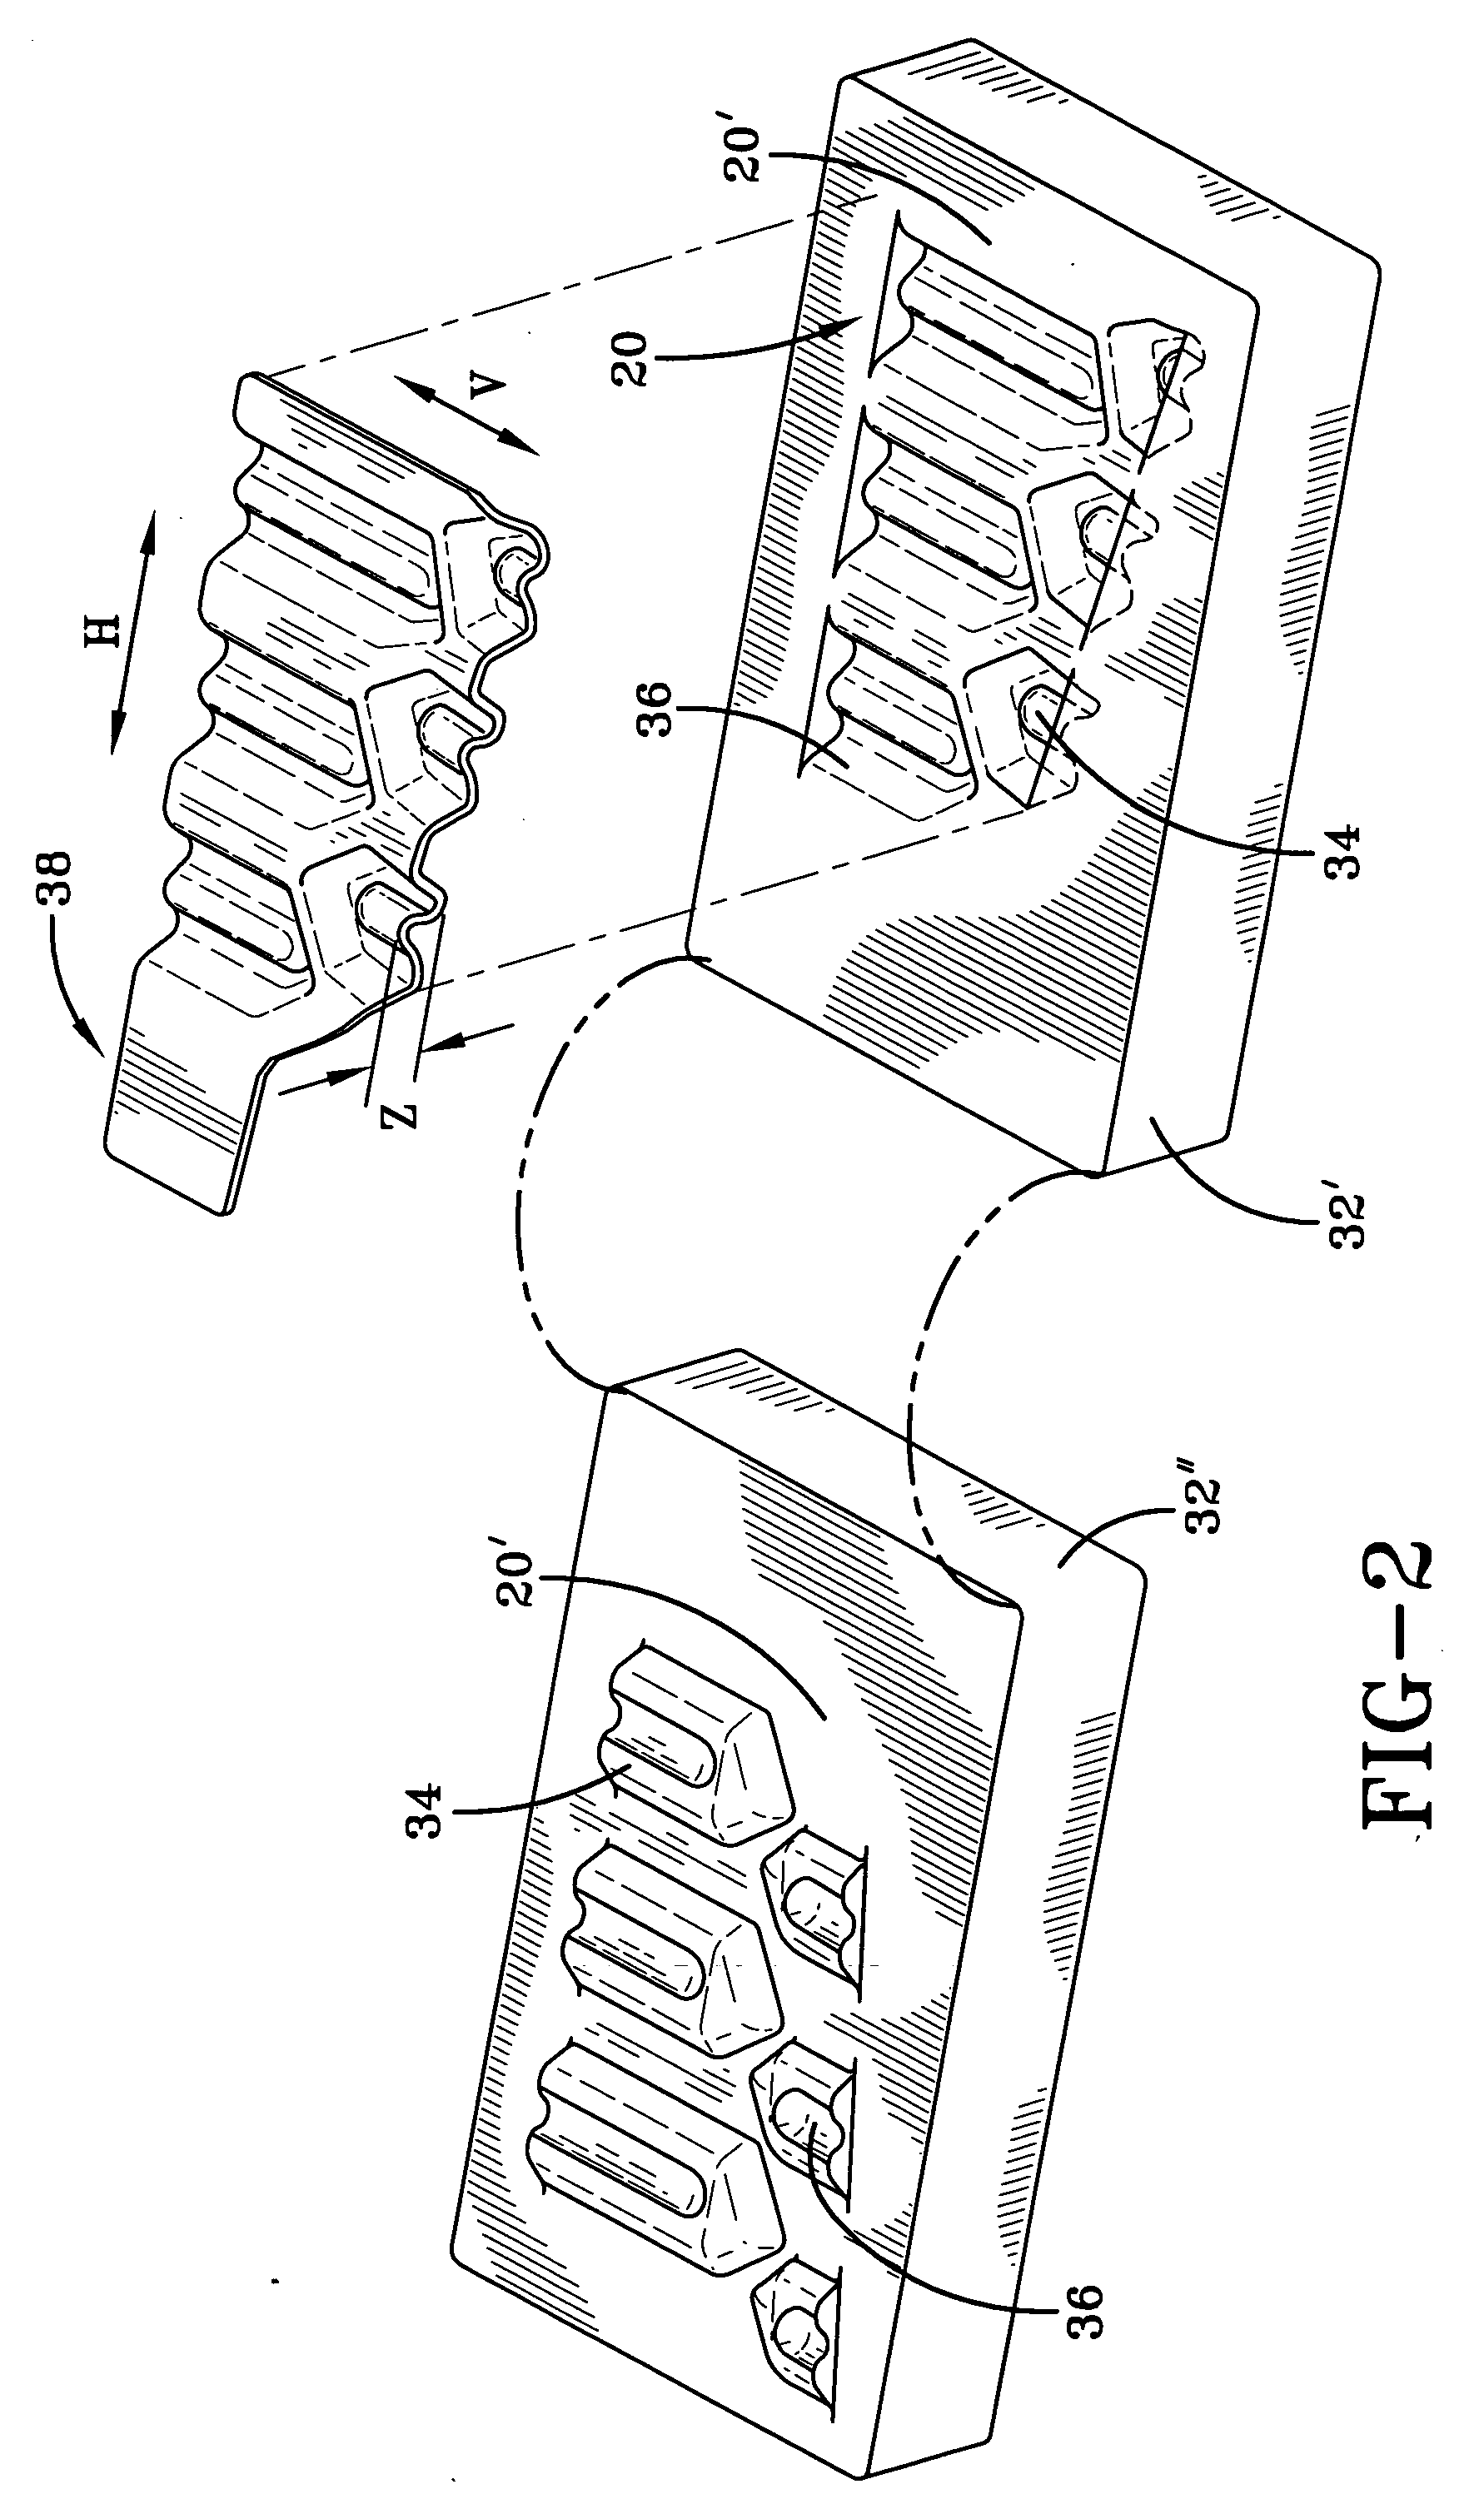 Three-dimensional tread sipes and mold blade for forming three-dimensional tread sipes